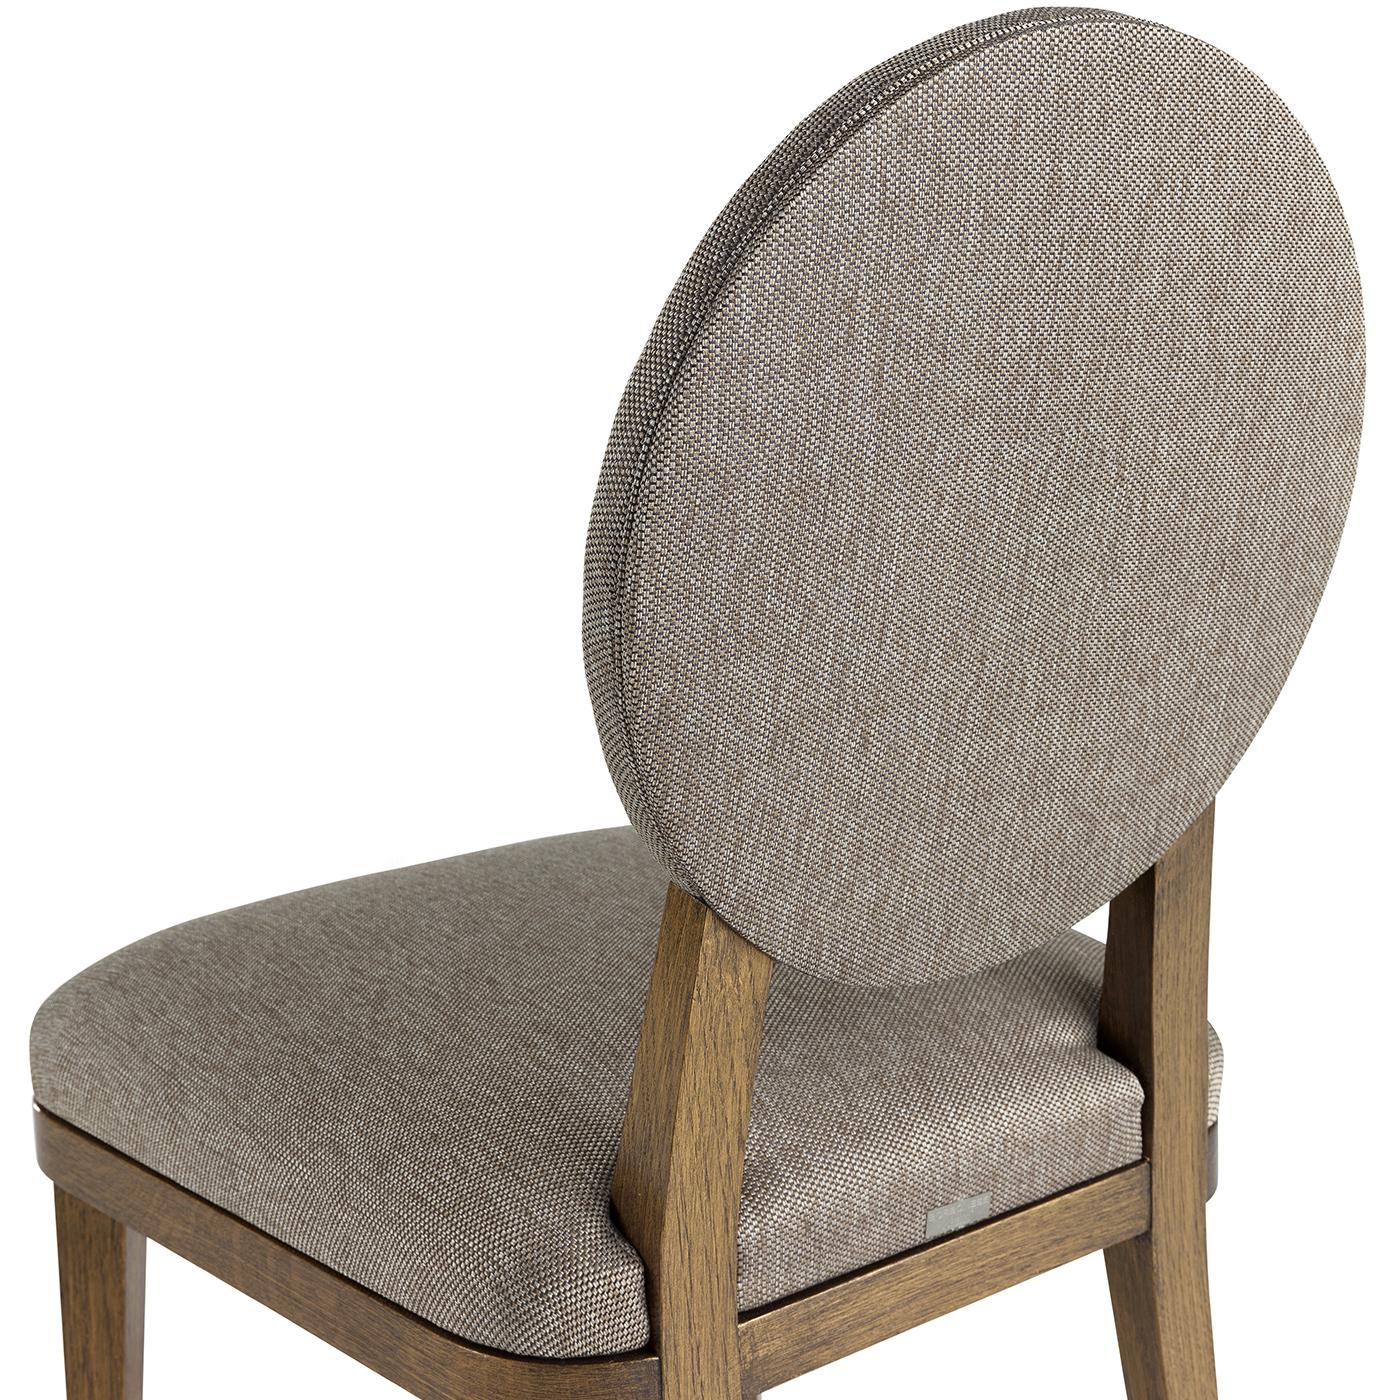 This elegant chair was crafted of solid durmast oak with a stunning finish that gives a unique bronzed brass effect to the natural grain of the wood of the four feet and the back structure connecting the seat with the oval backrest. The comfort of